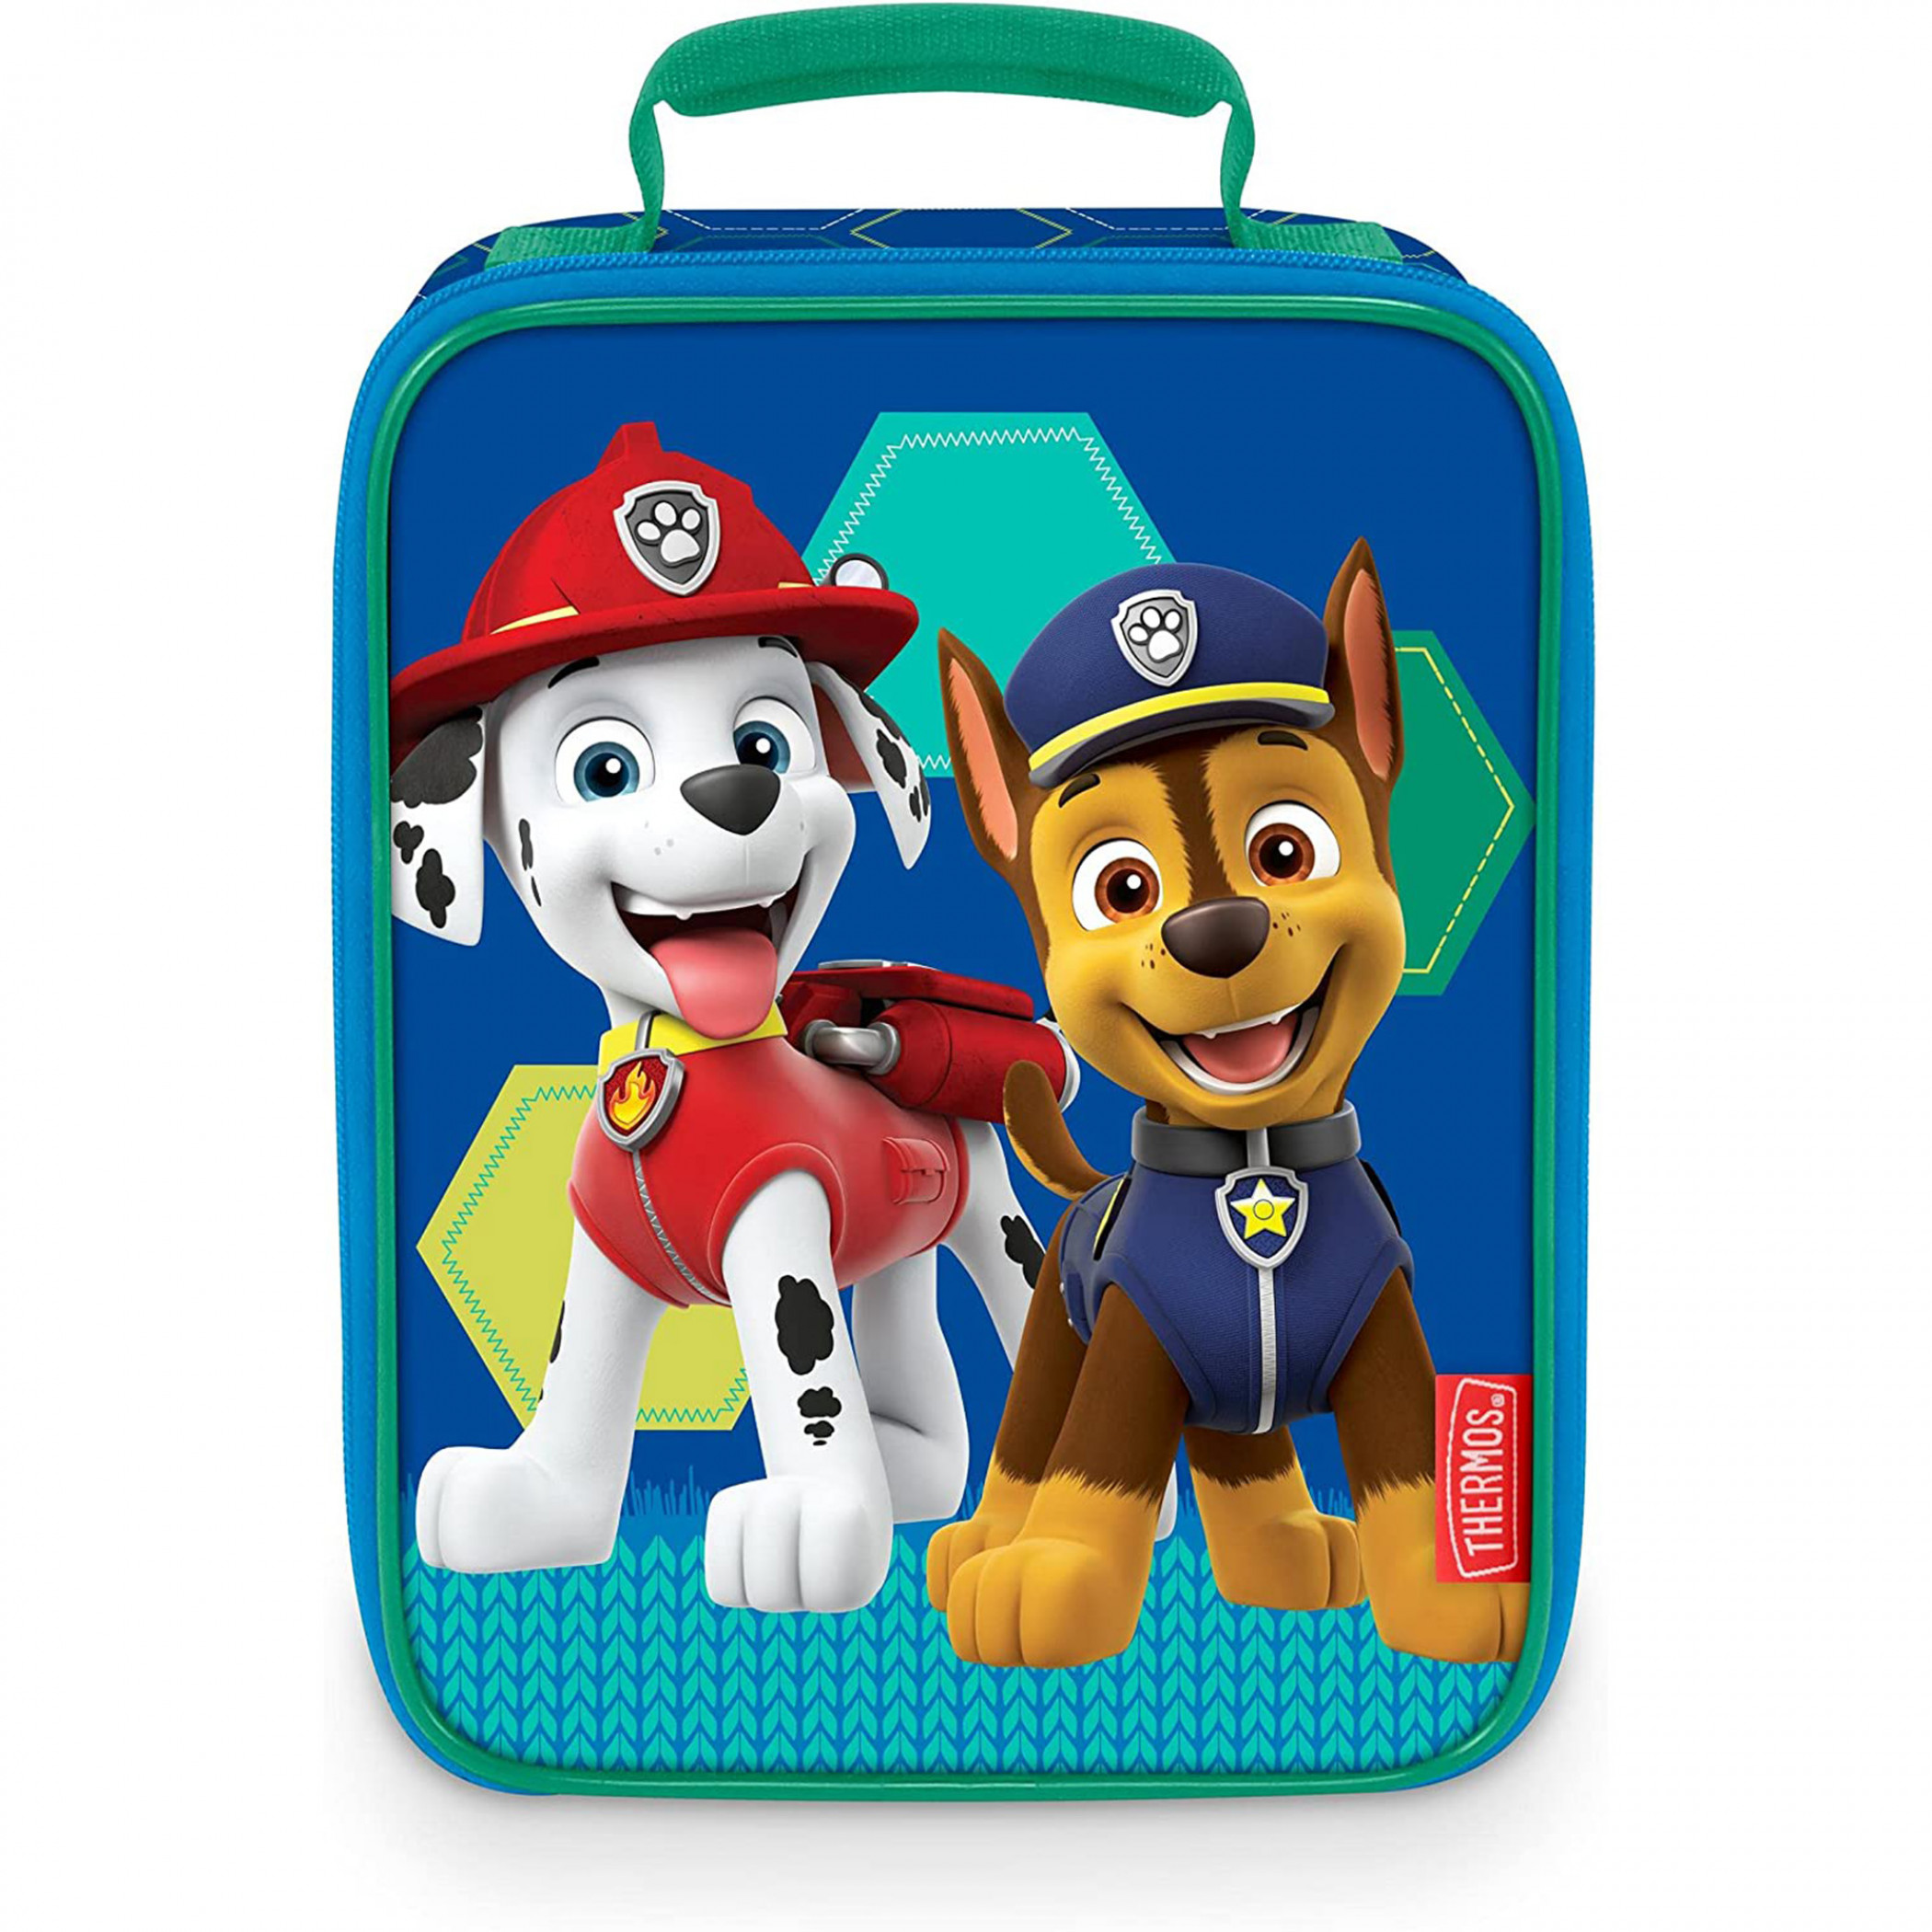 Paw Patrol Chase & Marshall Thermos Insulated Antimicrobial Lunch Box